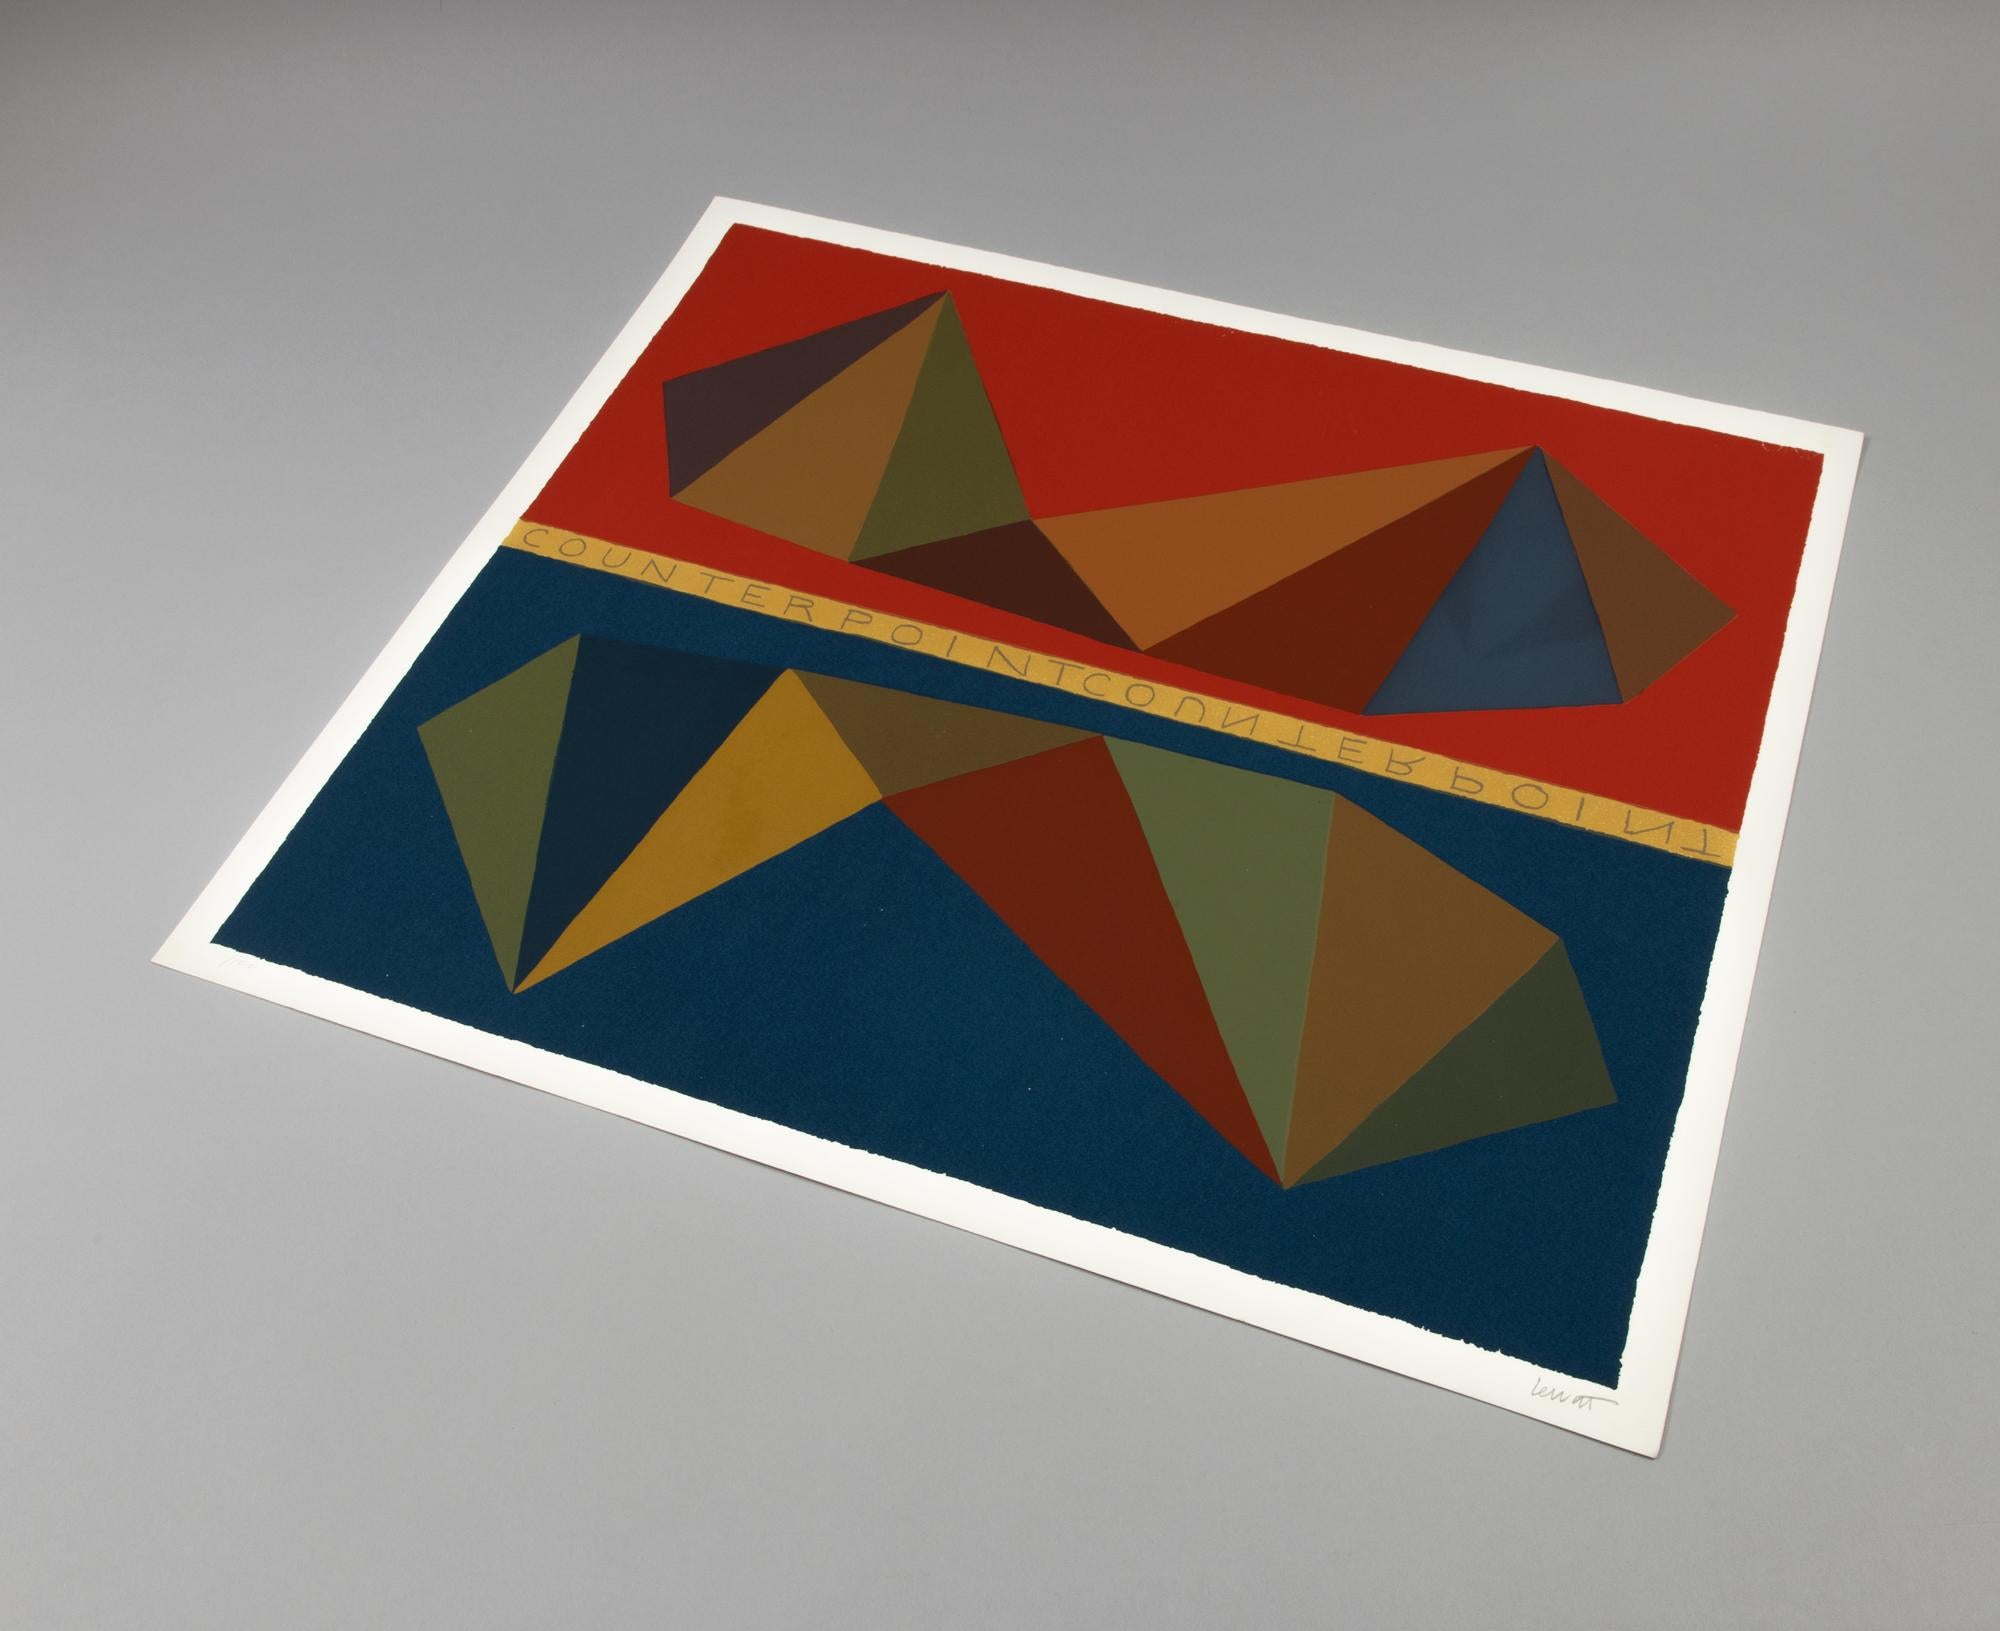 Sol Lewitt (American, 1928-2007)
Two Asymmetrical Pyramids and Their Mirror Images (Counterpoint), 1986
Medium: Silkscreen on Rosapina Fabriano paper
Dimensions: 53.7 × 61.9 cm (21.1 × 24.4 in)
Edition of 100: Hand signed and numbered in